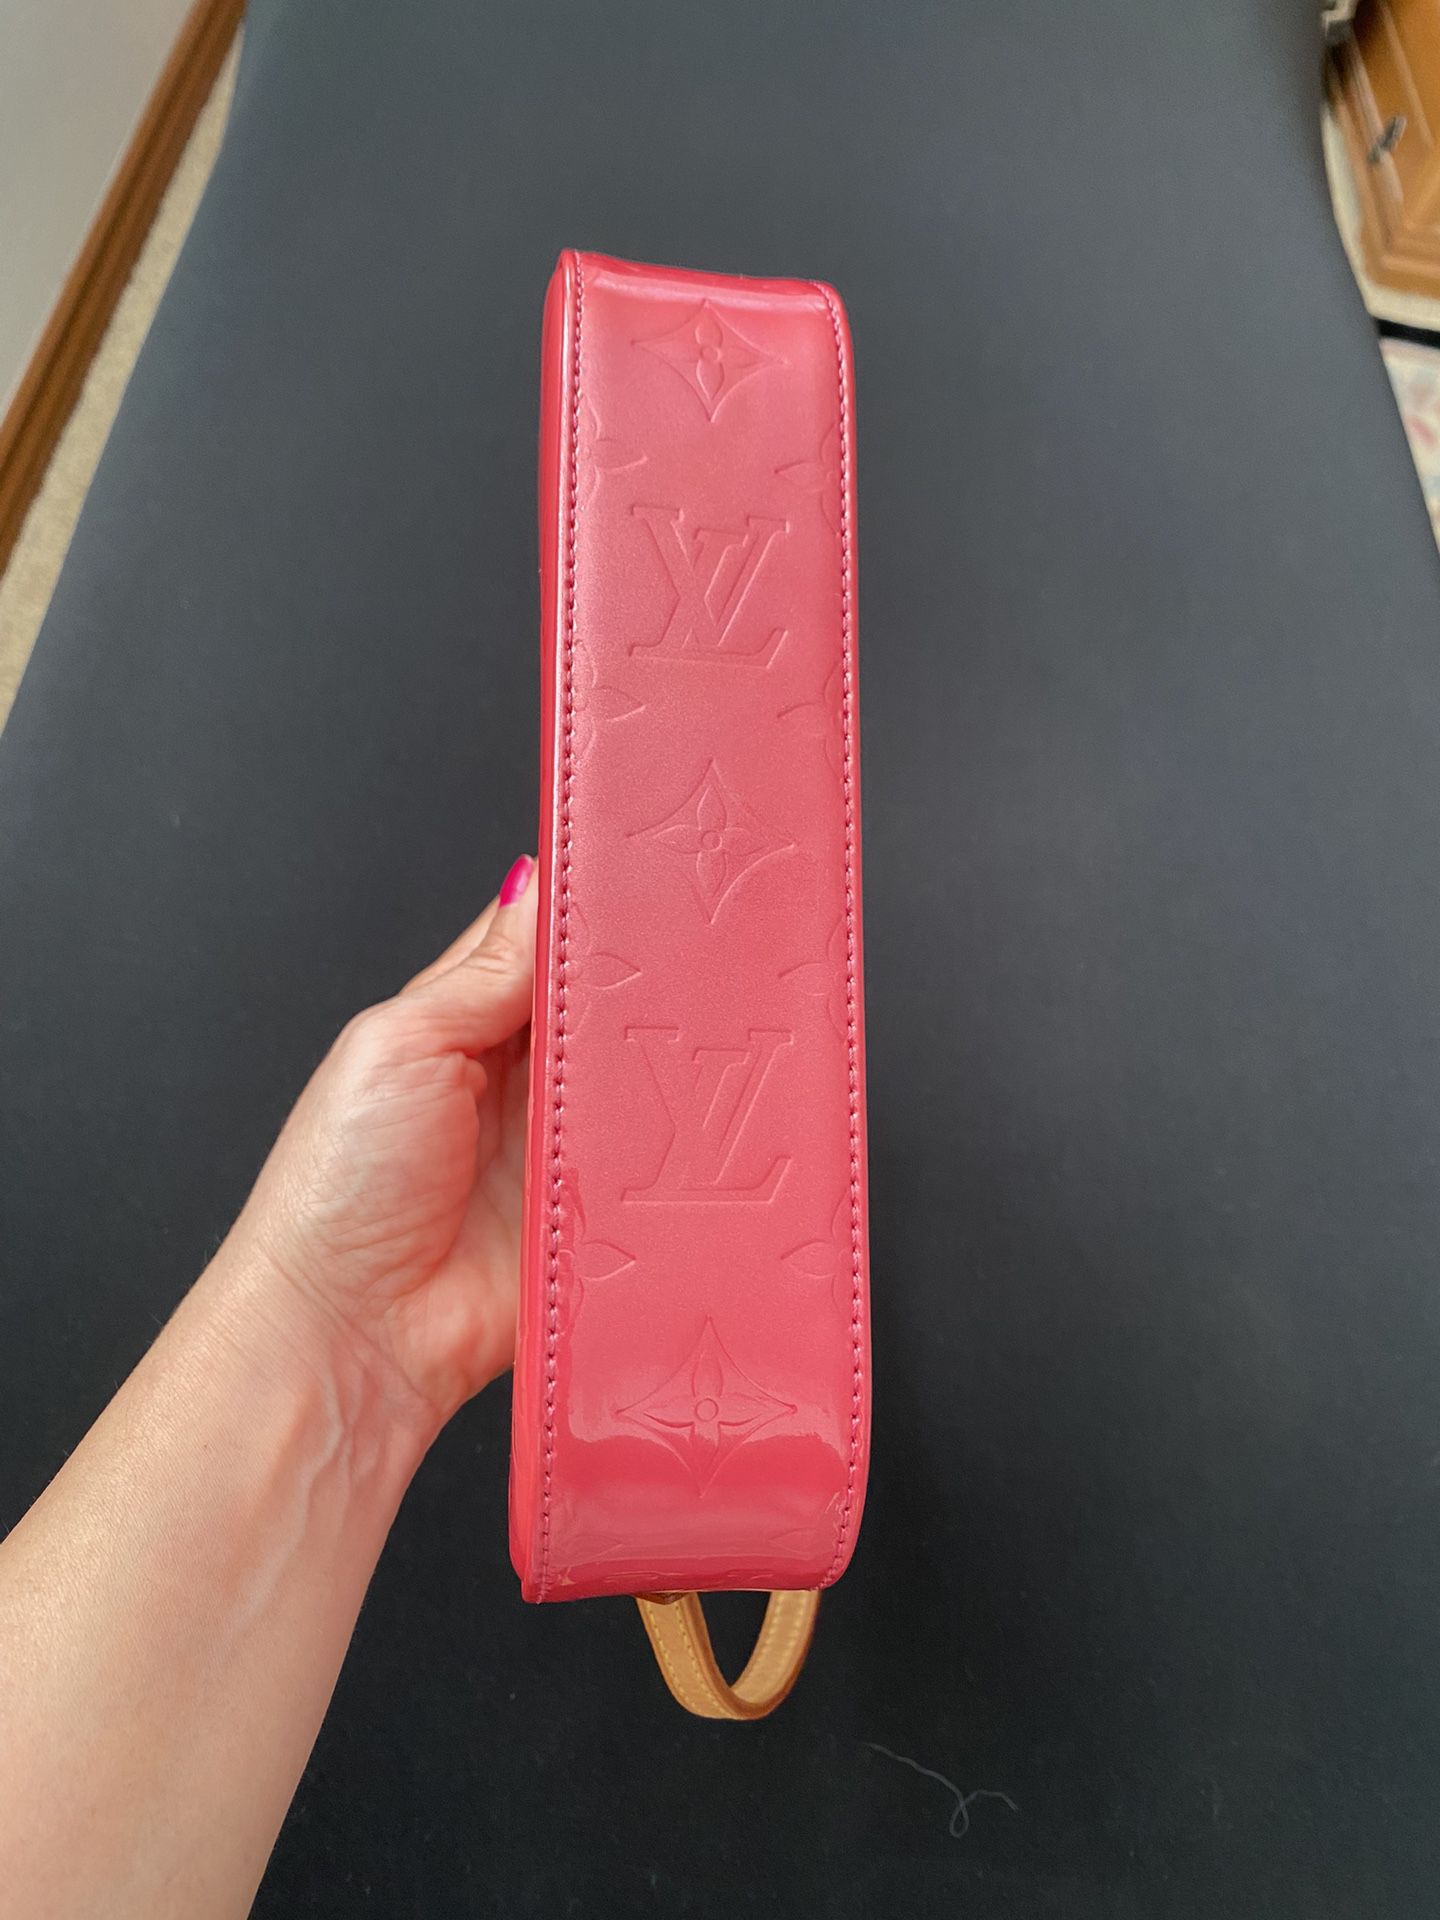 Authenic vintage louis vuitton monogram red vernis for Sale in Beverly  Hills, CA - OfferUp